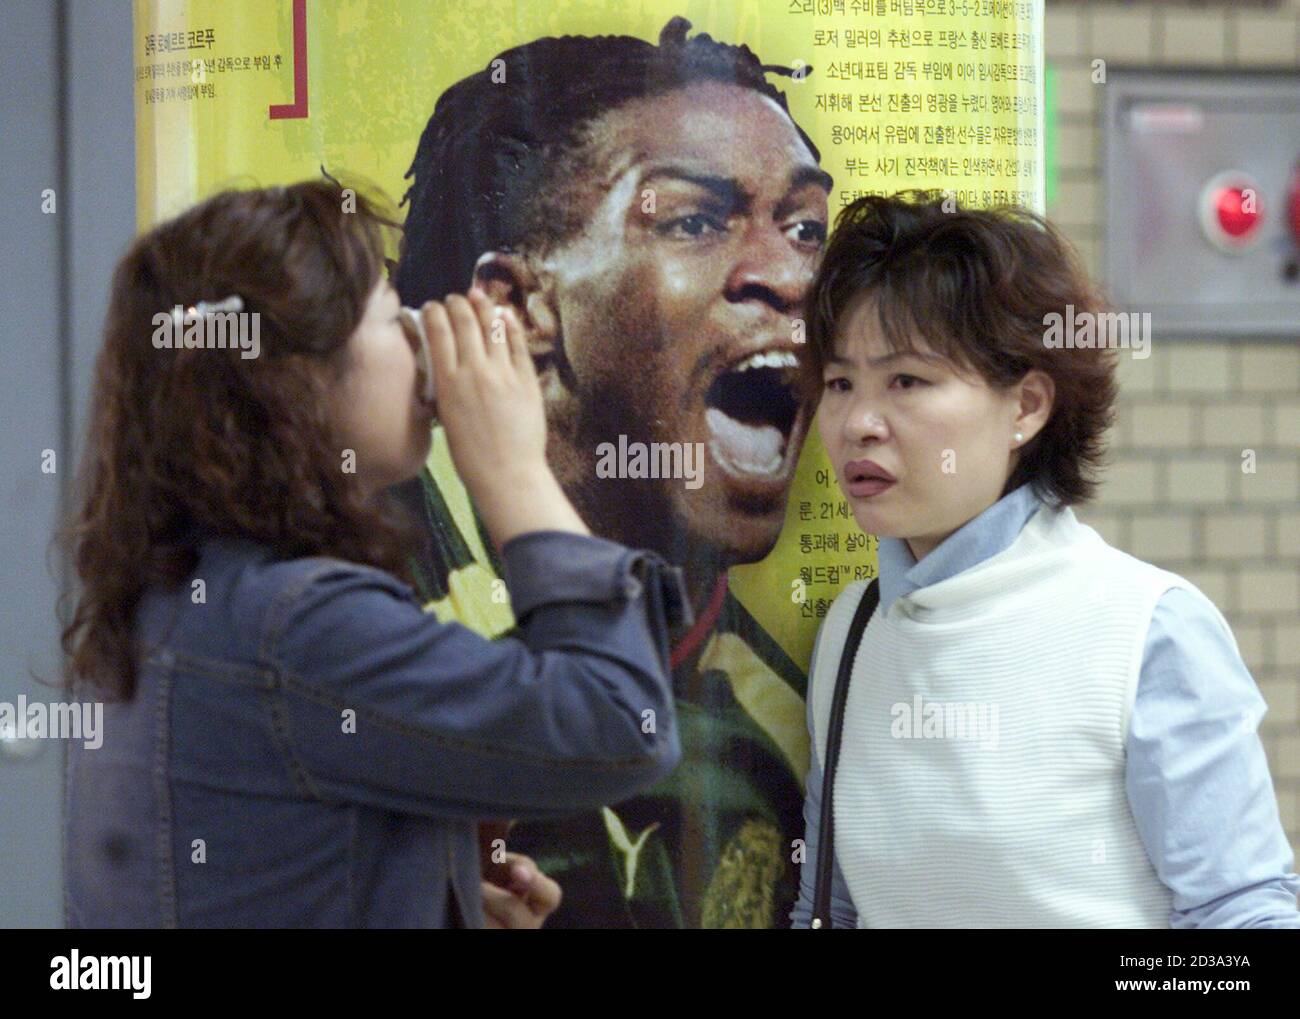 Korean women stand next to a subway station pillar bearing an action image of Cameroon's soccer star Rigobert Song in downtown Seoul May 6, 2002. As the 2002 soccer World Cup final draws nearer, with just 25 days until matches begin, host cities throughout Korea and co-host nation Japan are getting into the spirit of the tournament with giant posters and colourful decorations. REUTERS/Jason Reed  JIR/PB Stock Photo